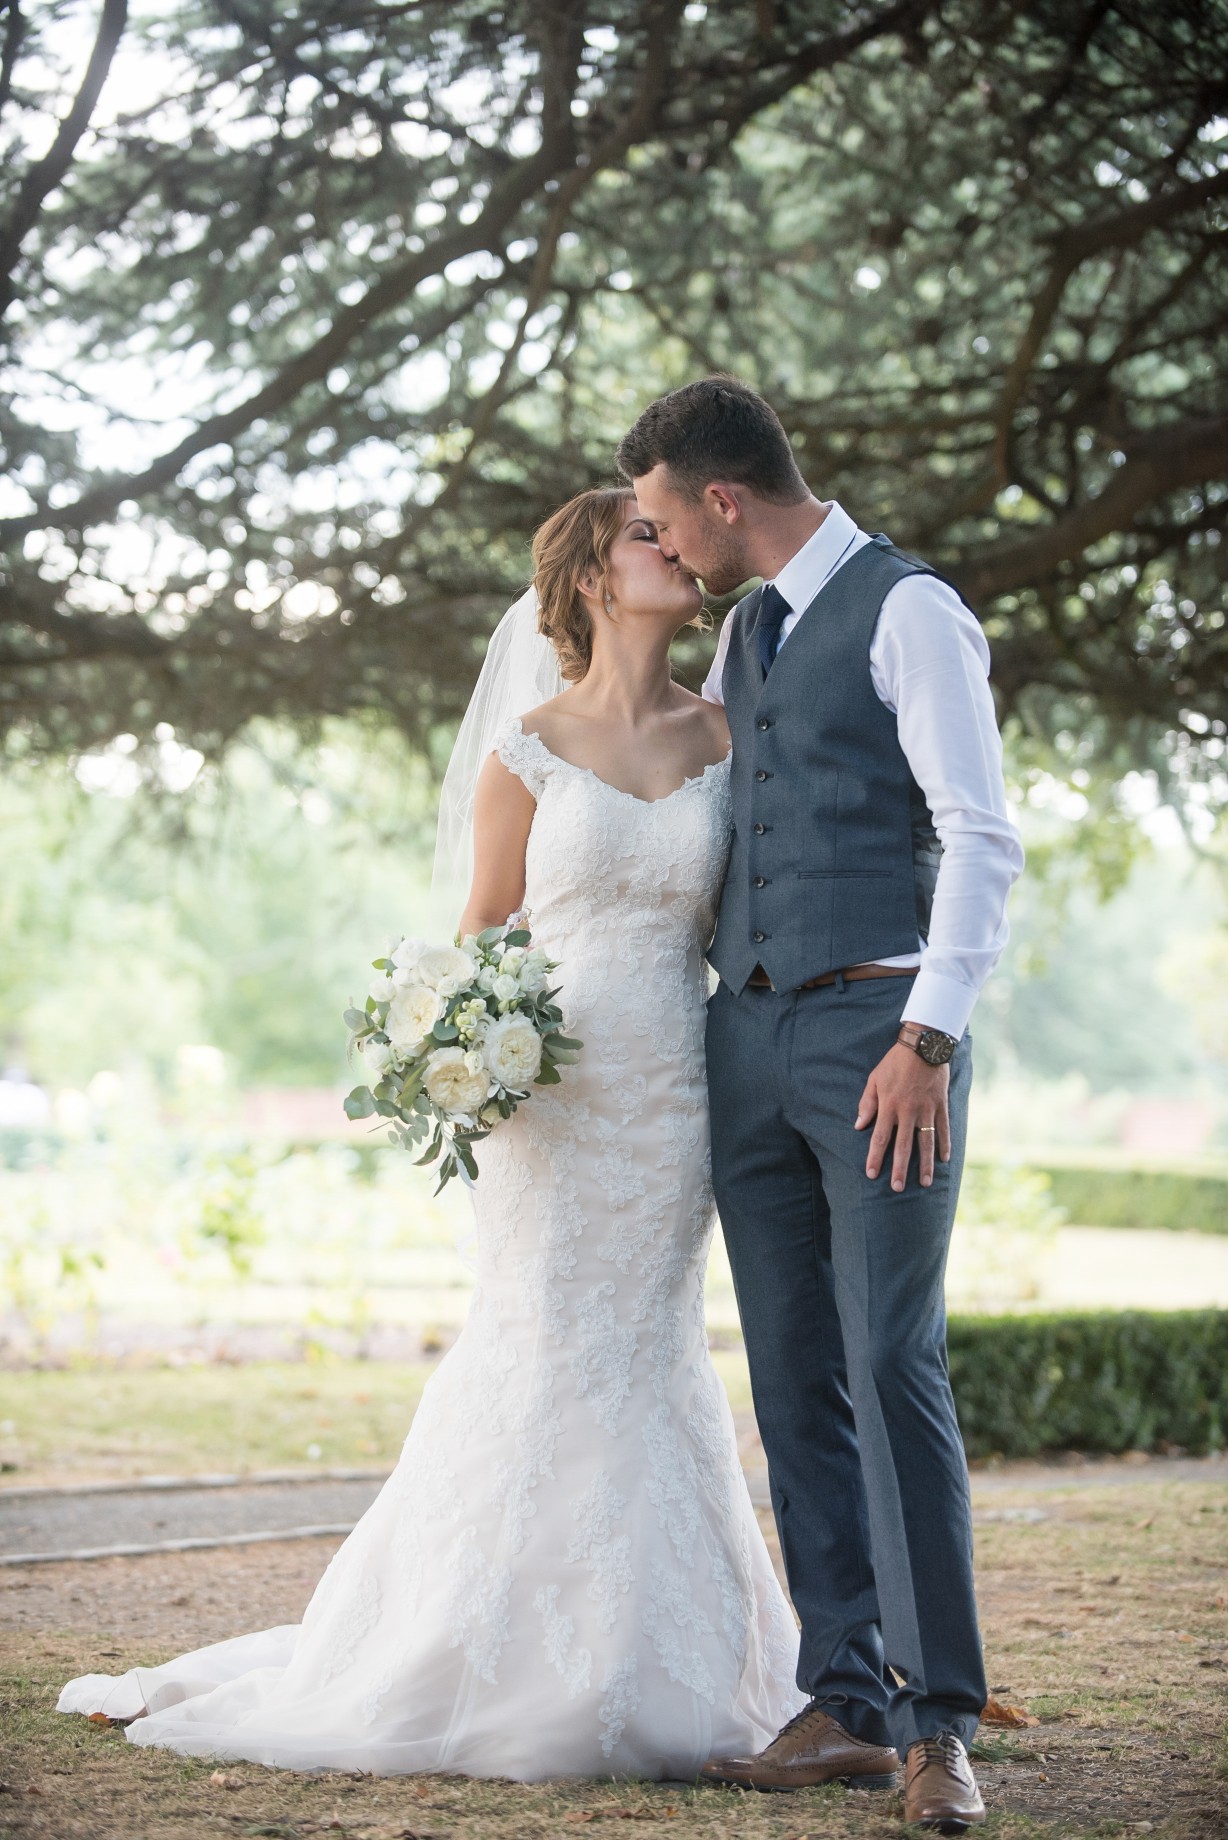 Wedding photography at Tudor Barn in Eltham - the bride and groom